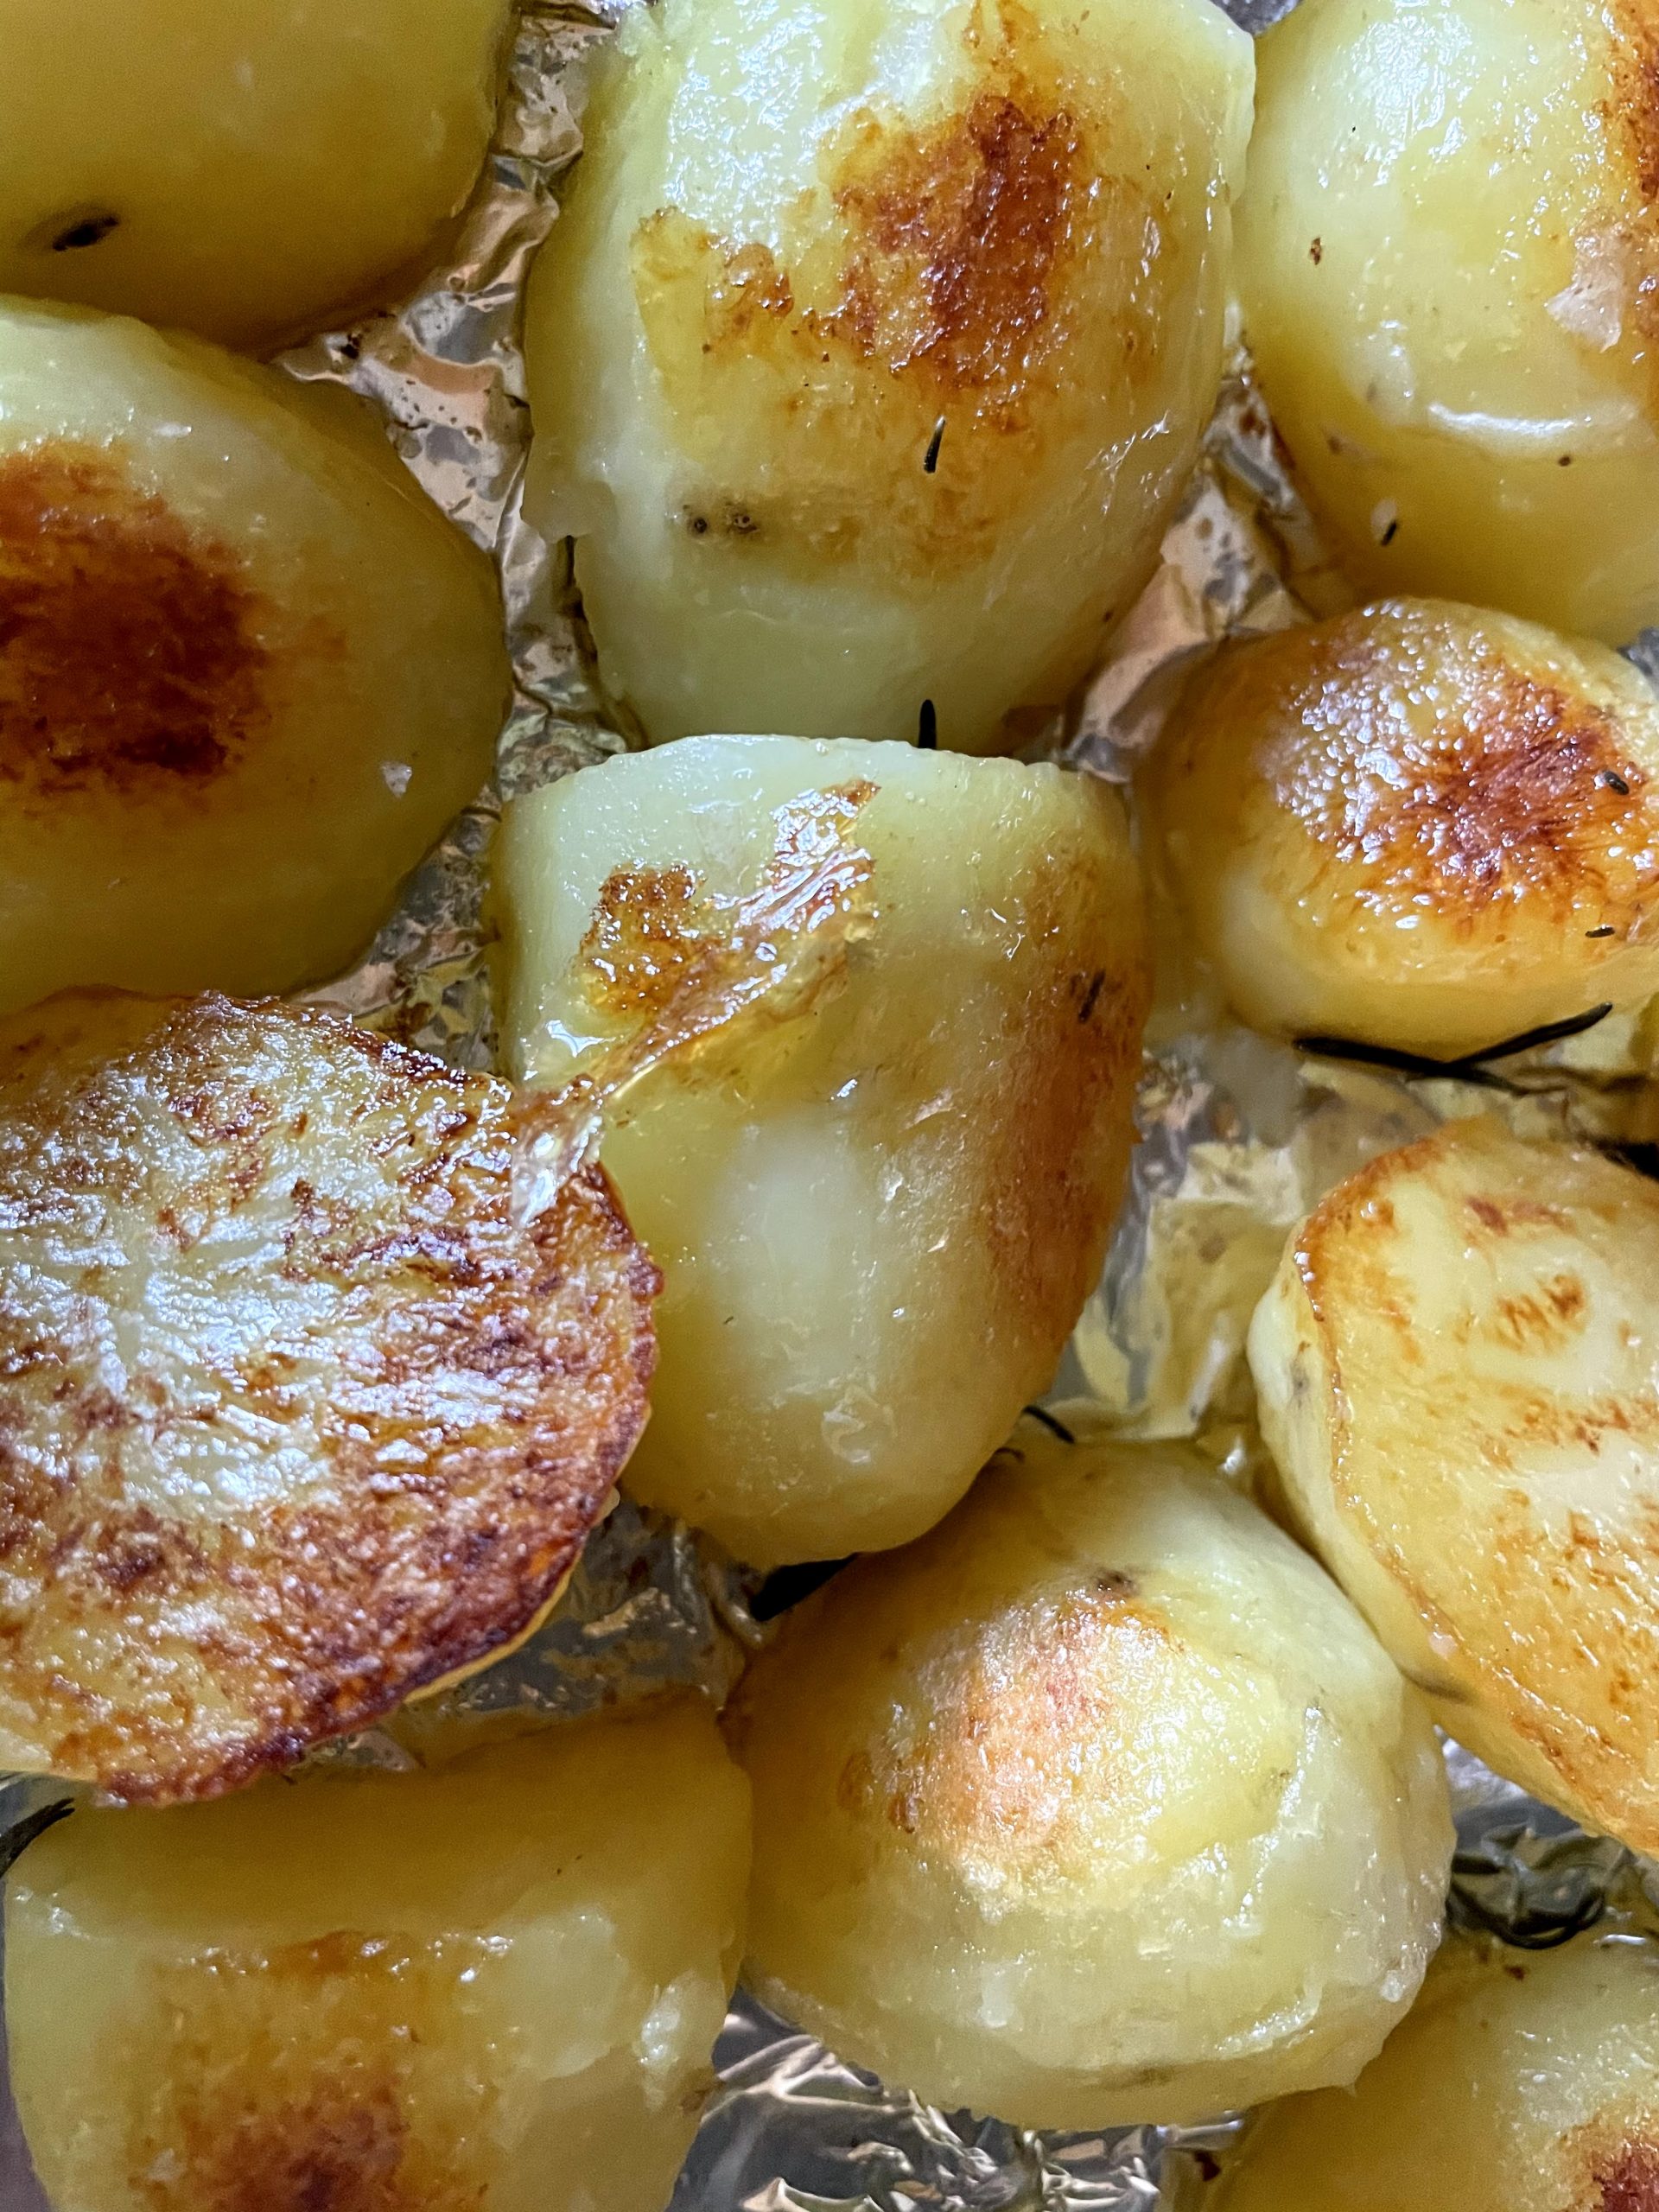 Potatoes individually turned to ensure even browning.